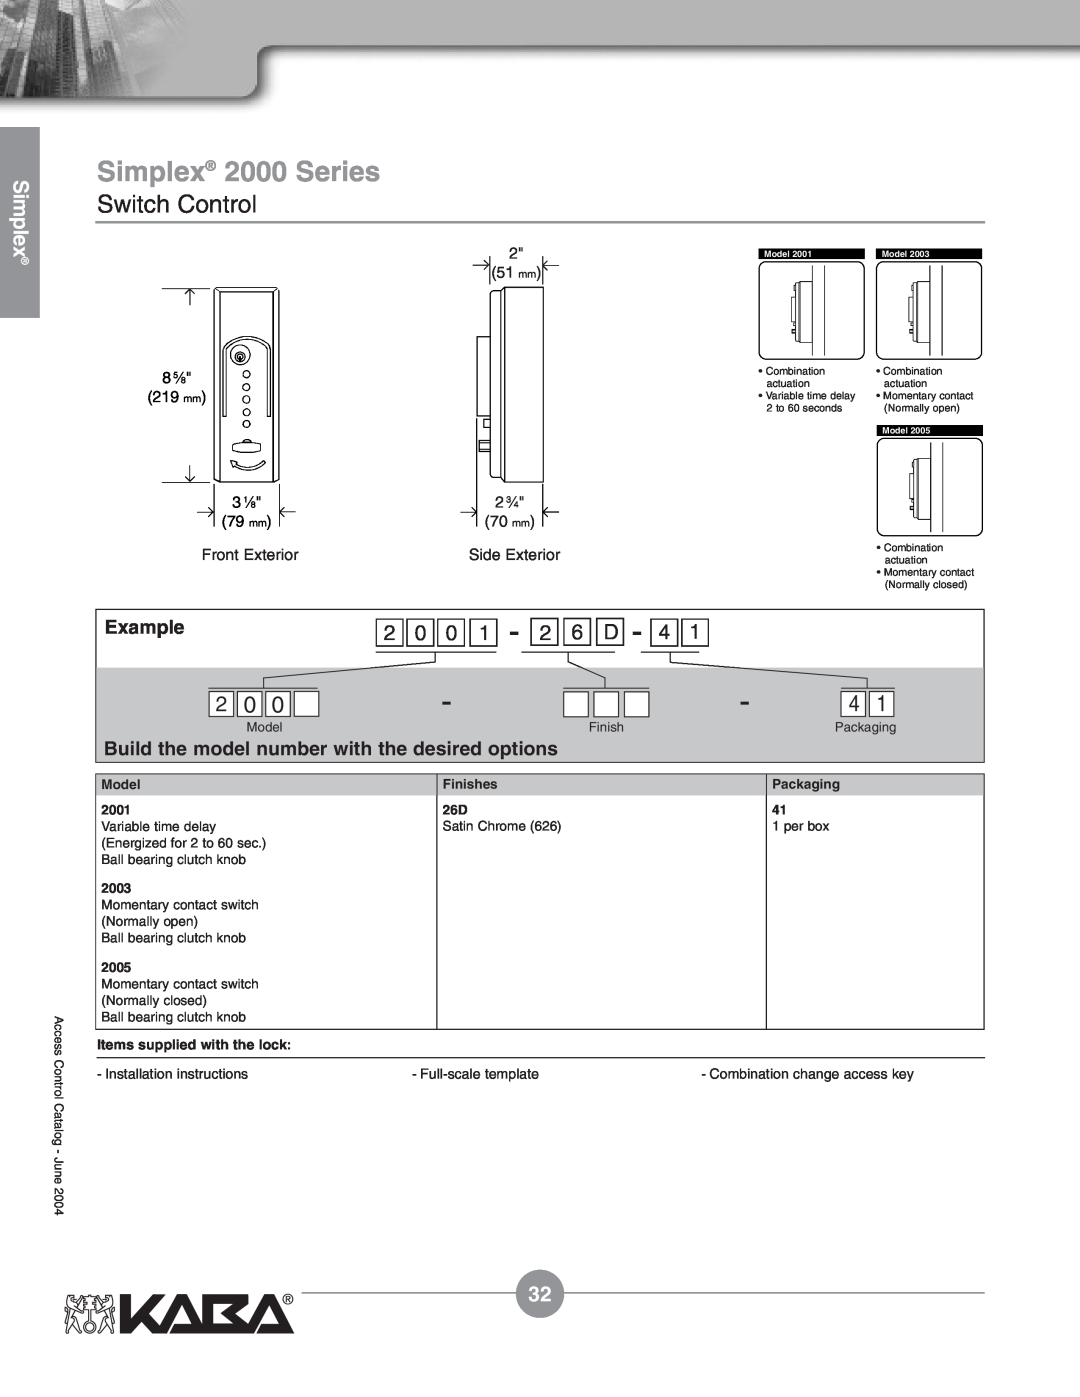 Assa Mechanical Pushbutton Locks manual Simplex 2000 Series, Switch Control, Example, Items supplied with the lock 